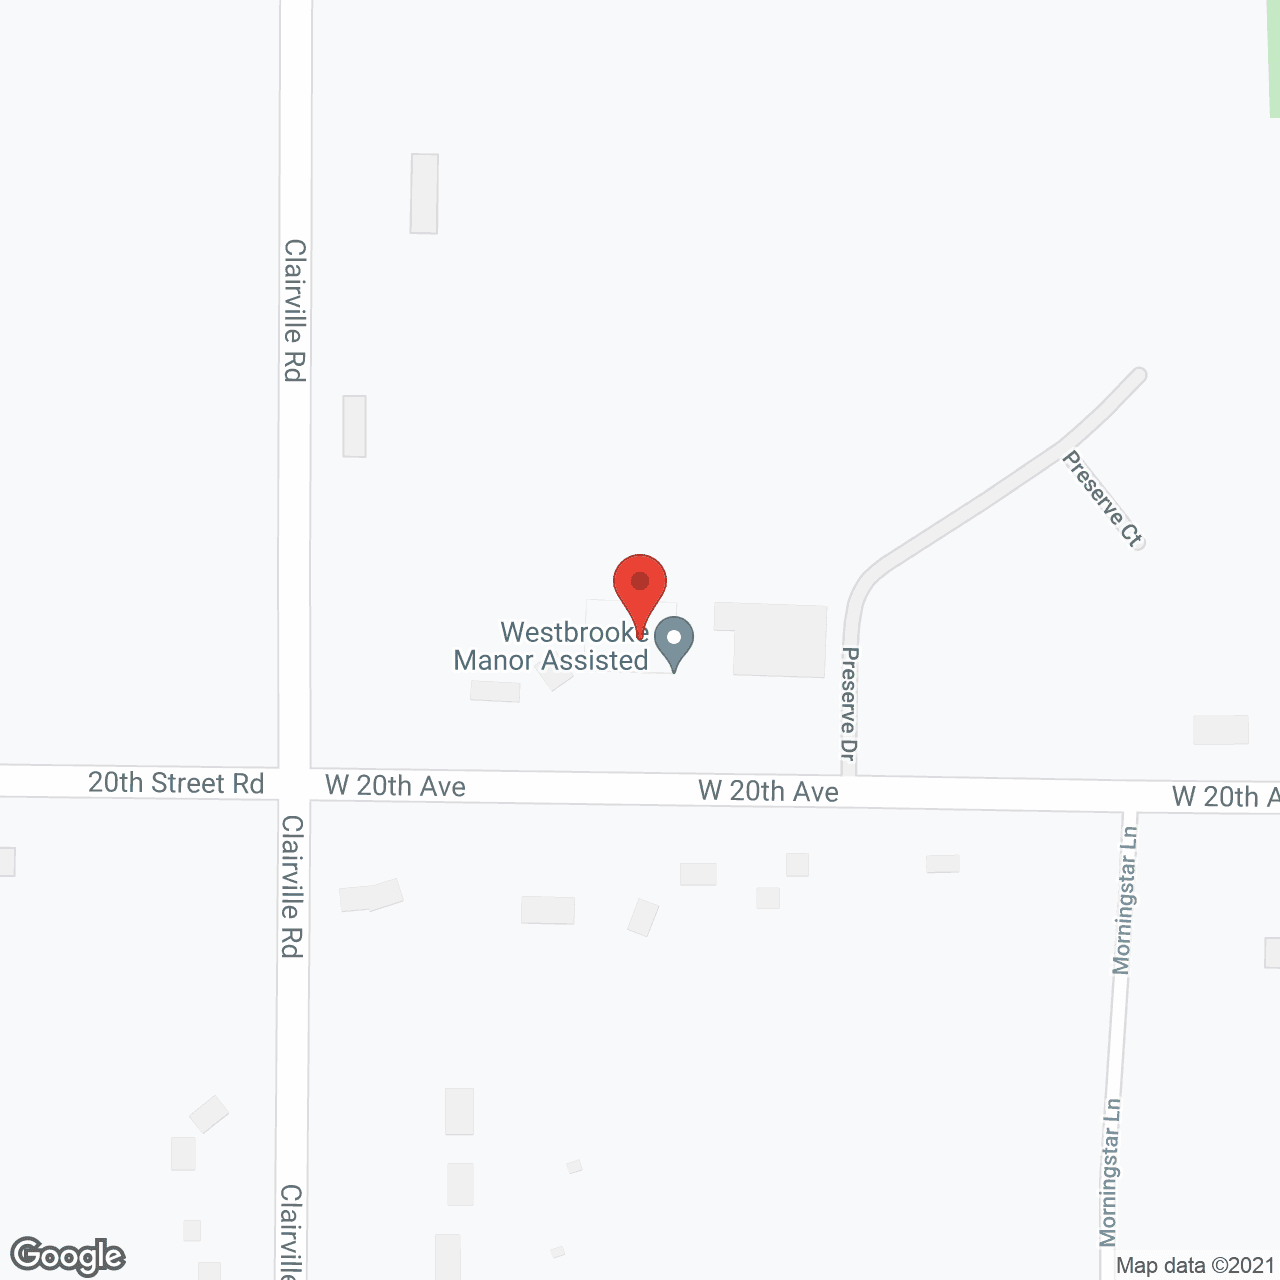 Westbrooke Manor Assisted Living and Memory Care in google map